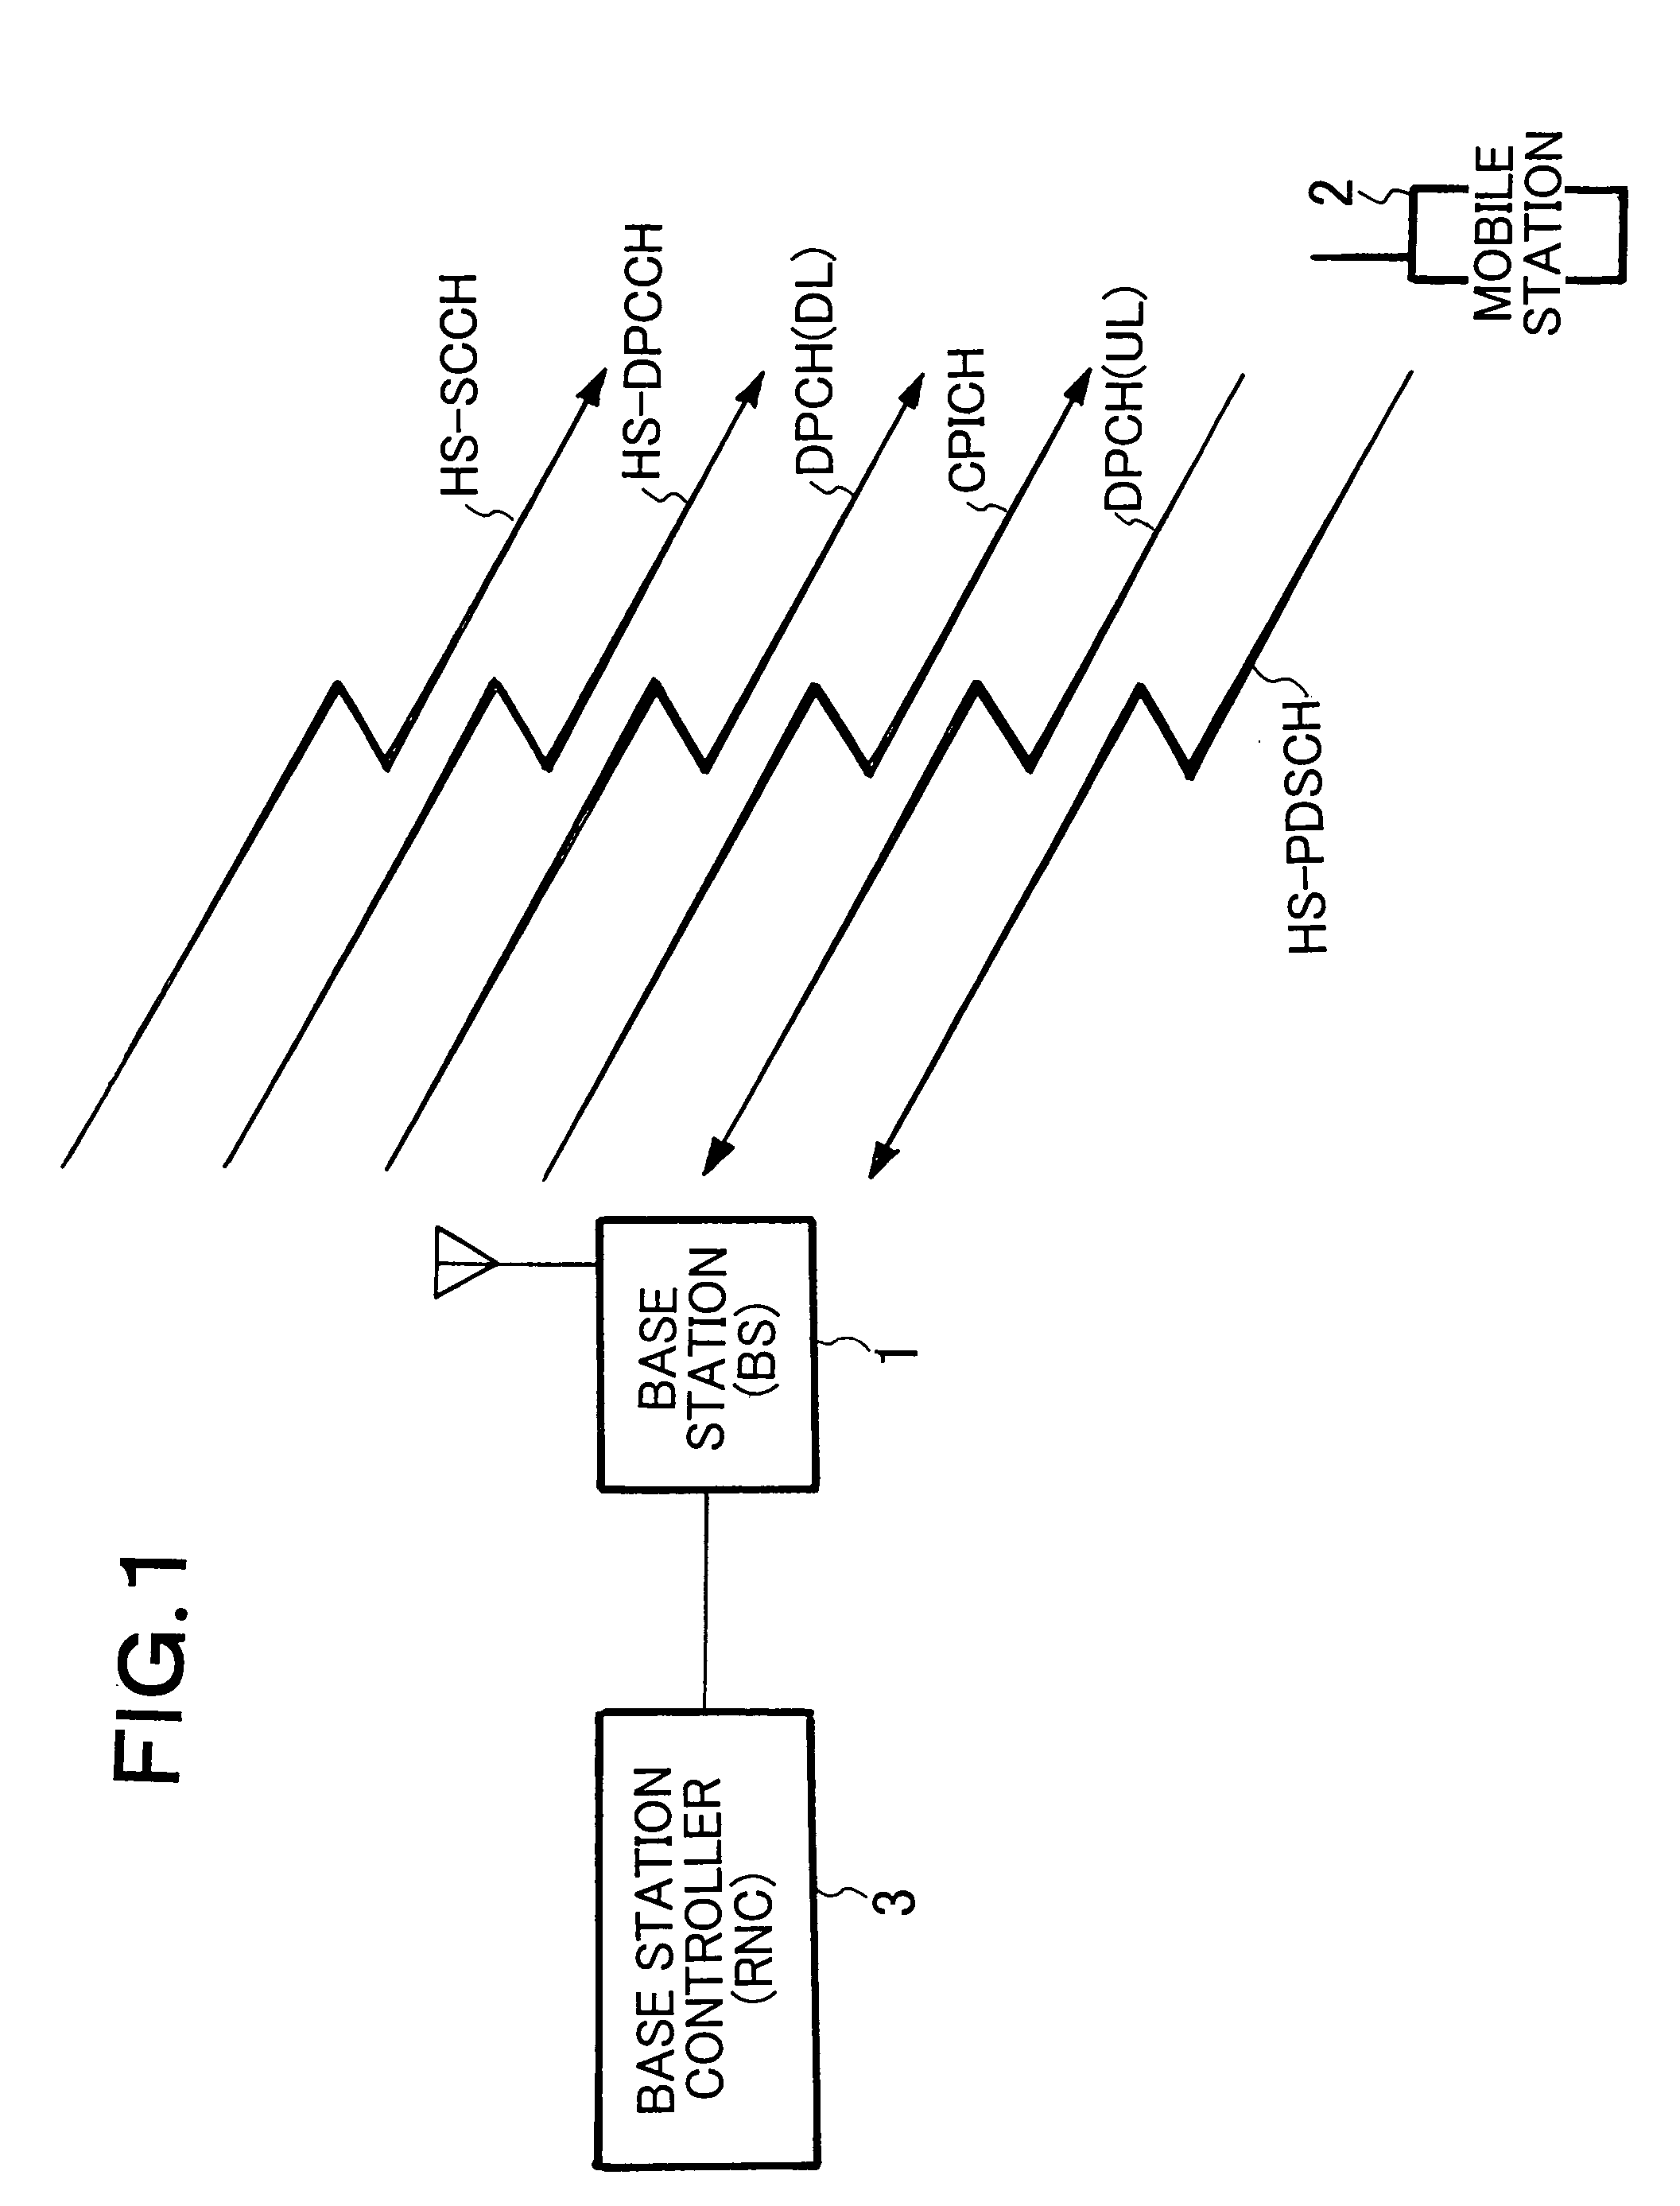 Synchronization establishment between a mobile station and base station system and method used for them